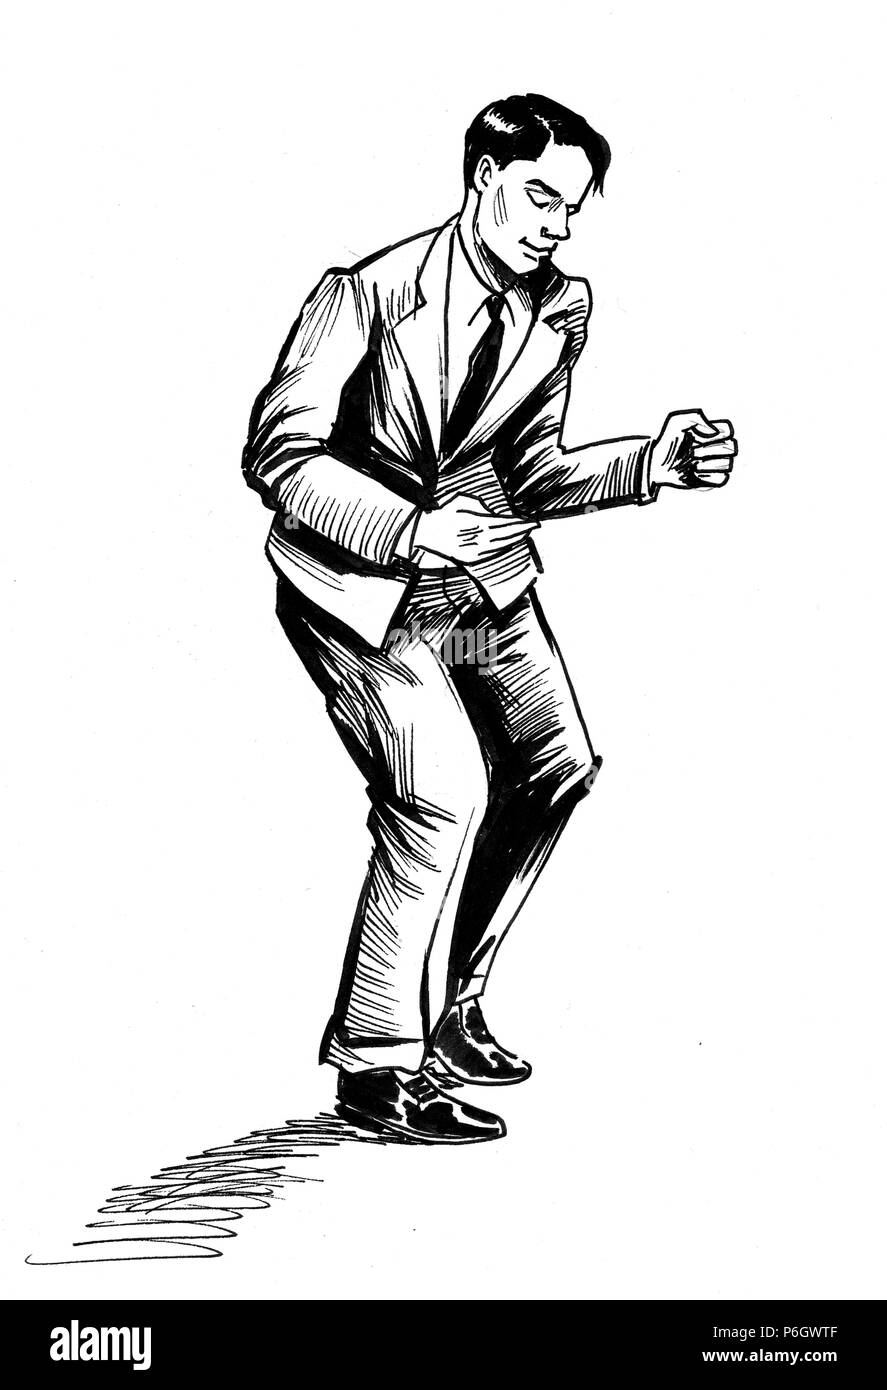 Dancing man. Ink black and white illustration Stock Photo